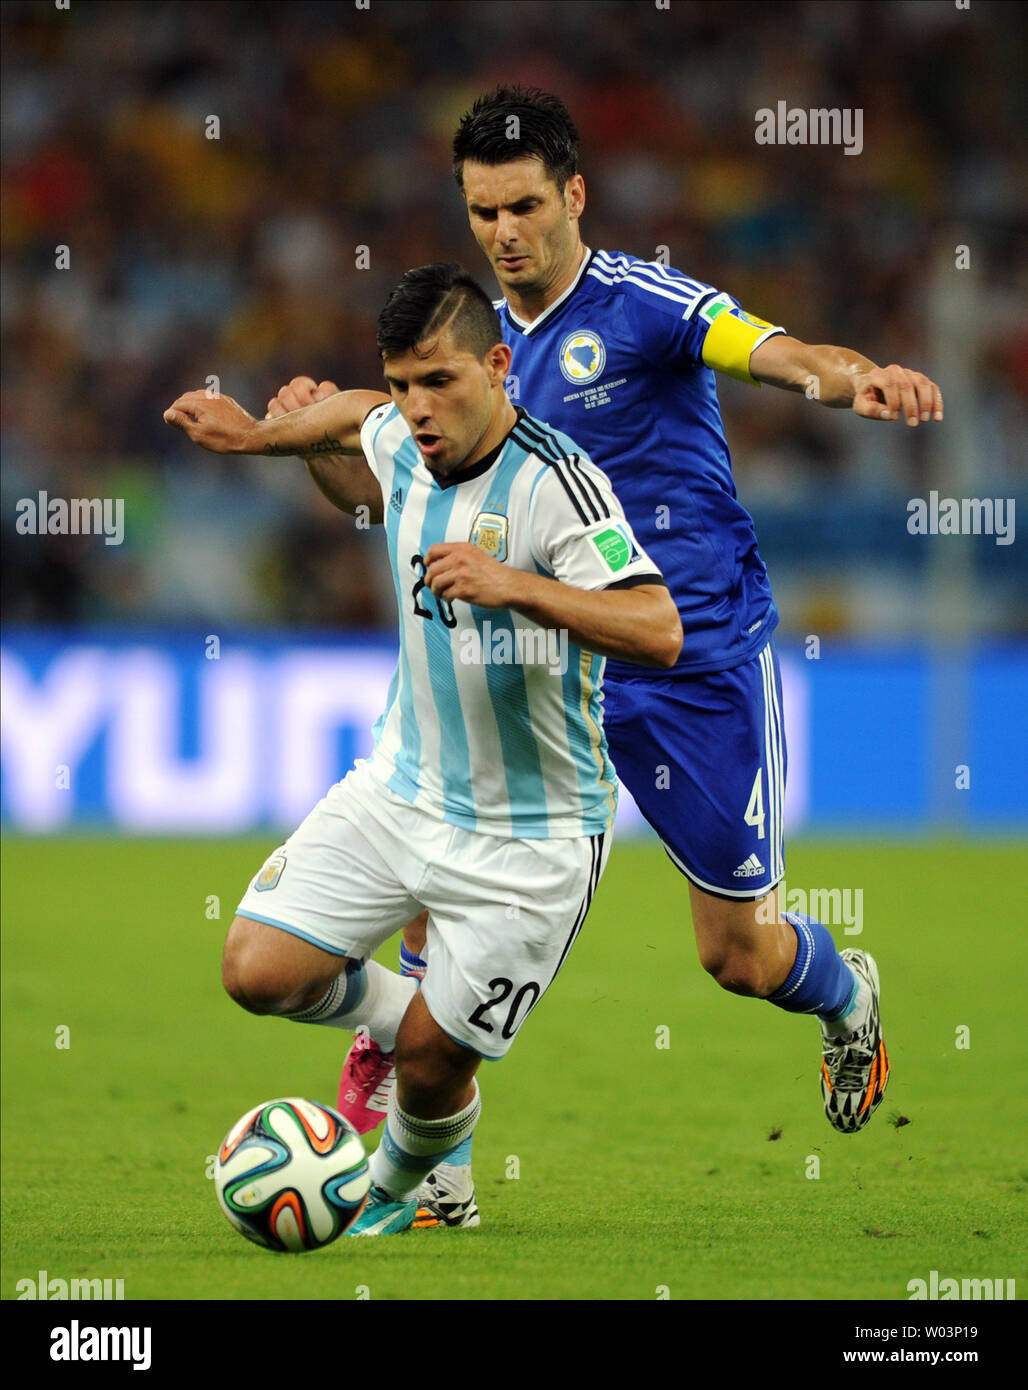 Sergio Aguero (L) of Argentina is chased by Emir Spahic of Bosnia Herzegovina during the 2014 FIFA World Cup Group F match at the Estadio do Maracana in Rio de Janeiro, Brazil on June 15, 2014. UPI/Chris Brunskill Stock Photo